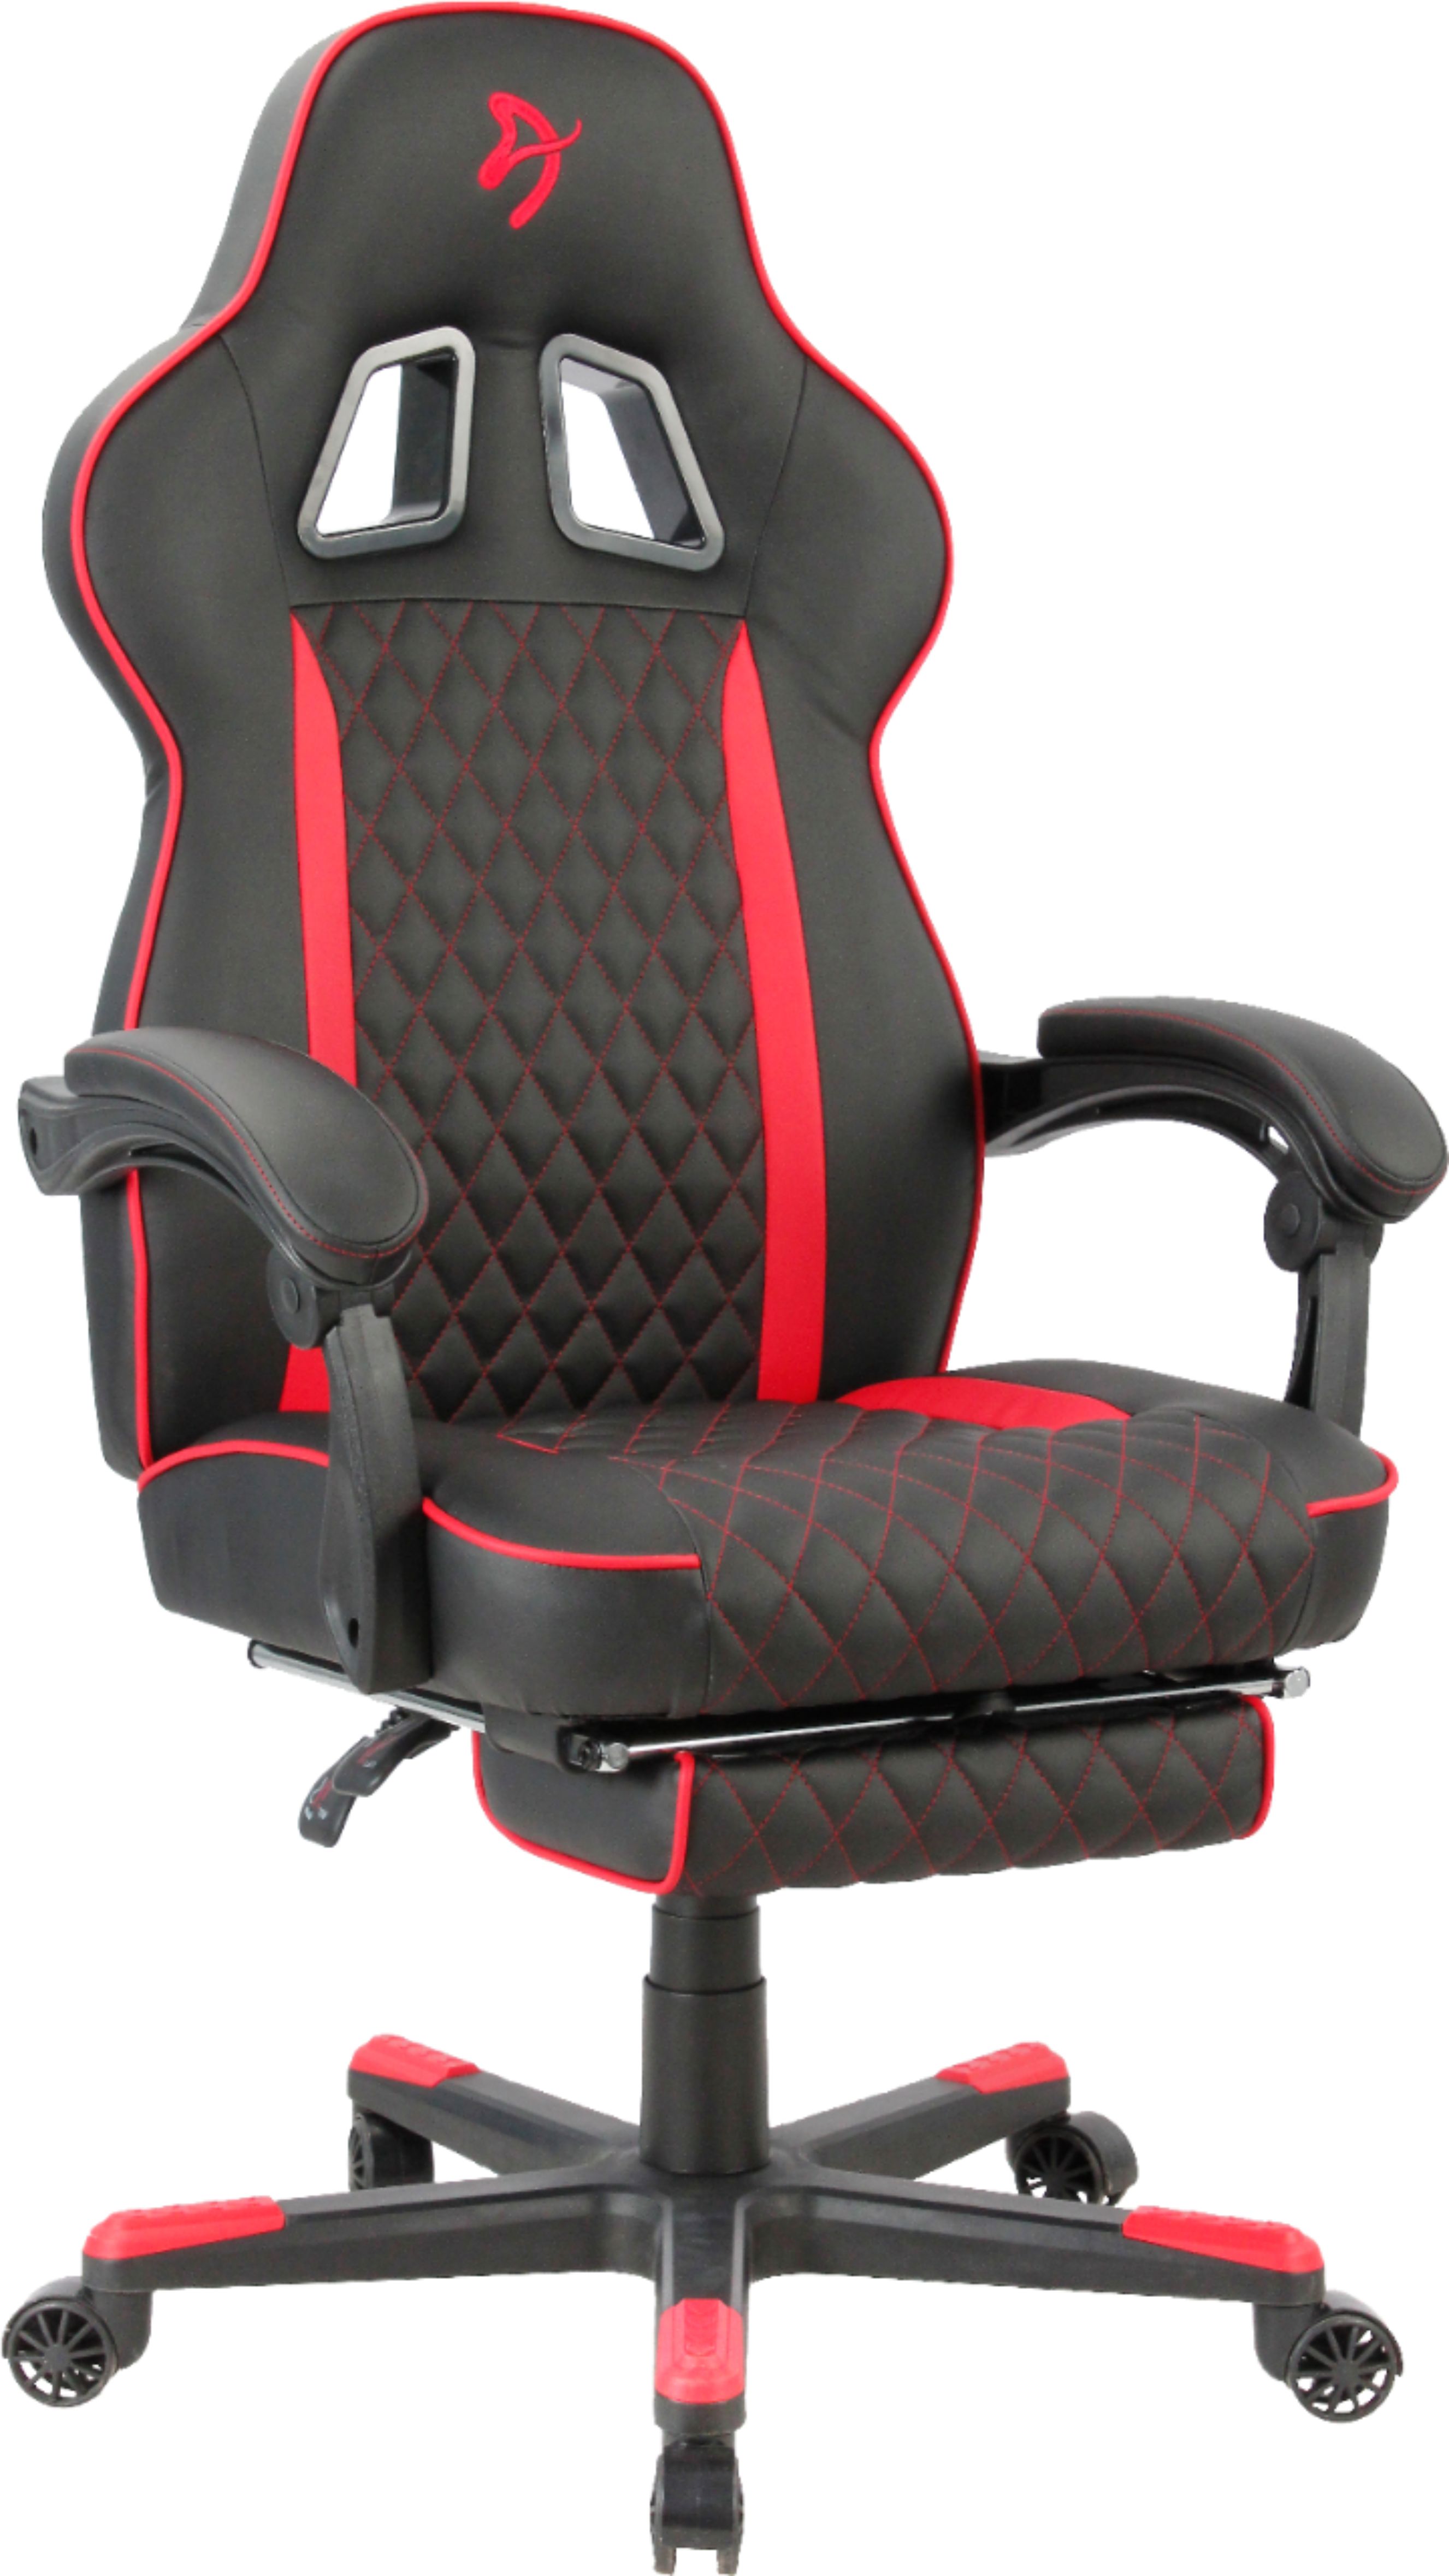 Angle View: Arozzi - Mugello Special Edition Gaming Chair with Footrest - Pure Black